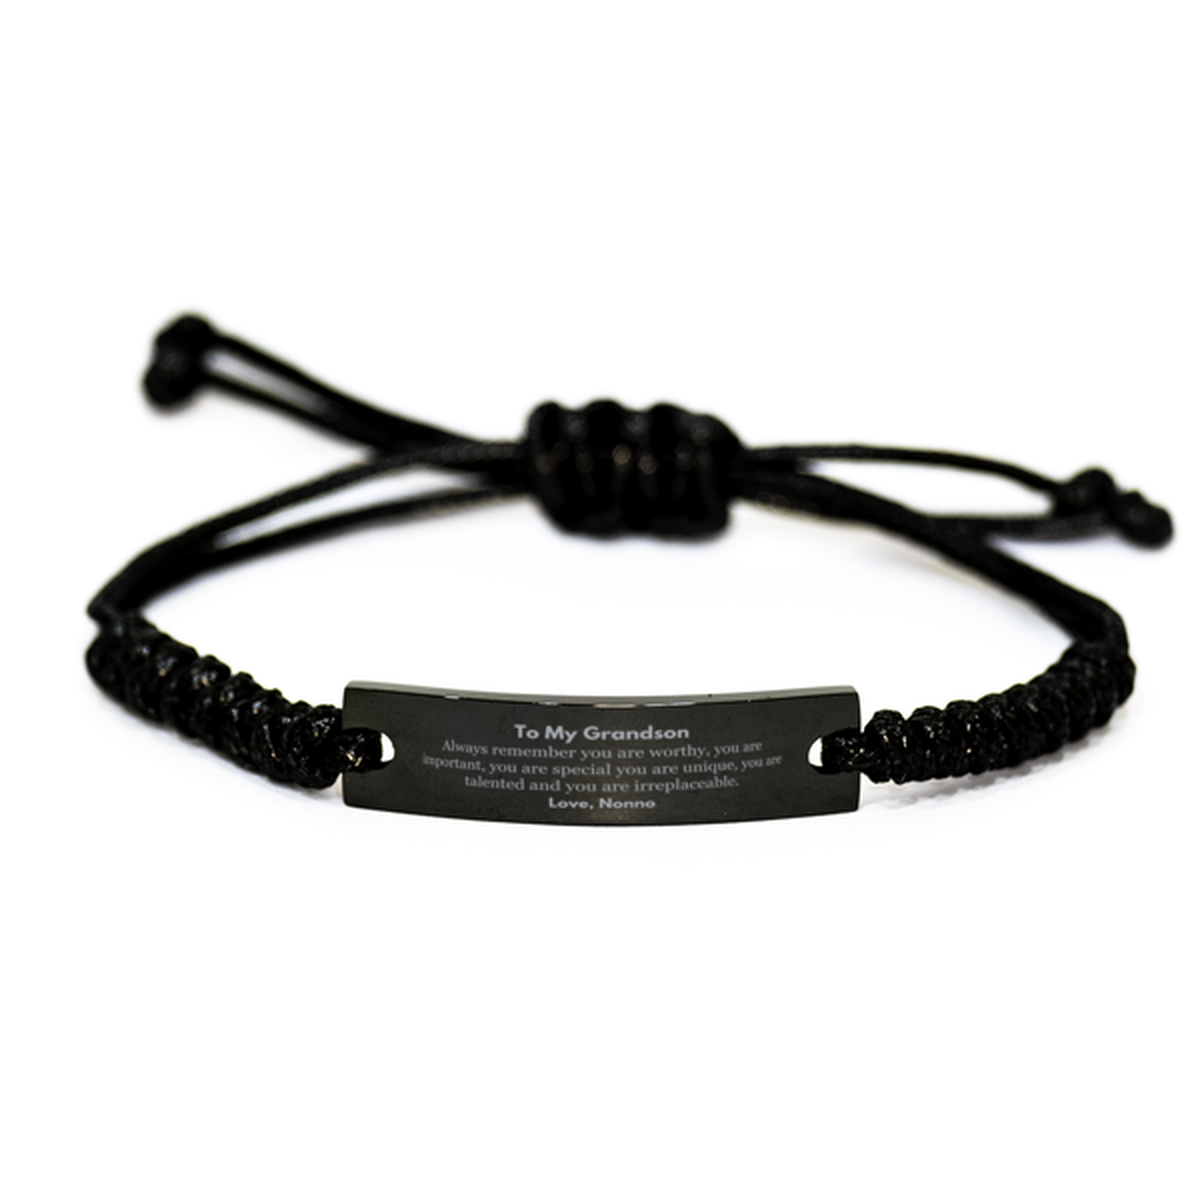 Grandson Birthday Gifts from Nonno, Inspirational Black Rope Bracelet for Grandson Christmas Graduation Gifts for Grandson Always remember you are worthy, you are important. Love, Nonno